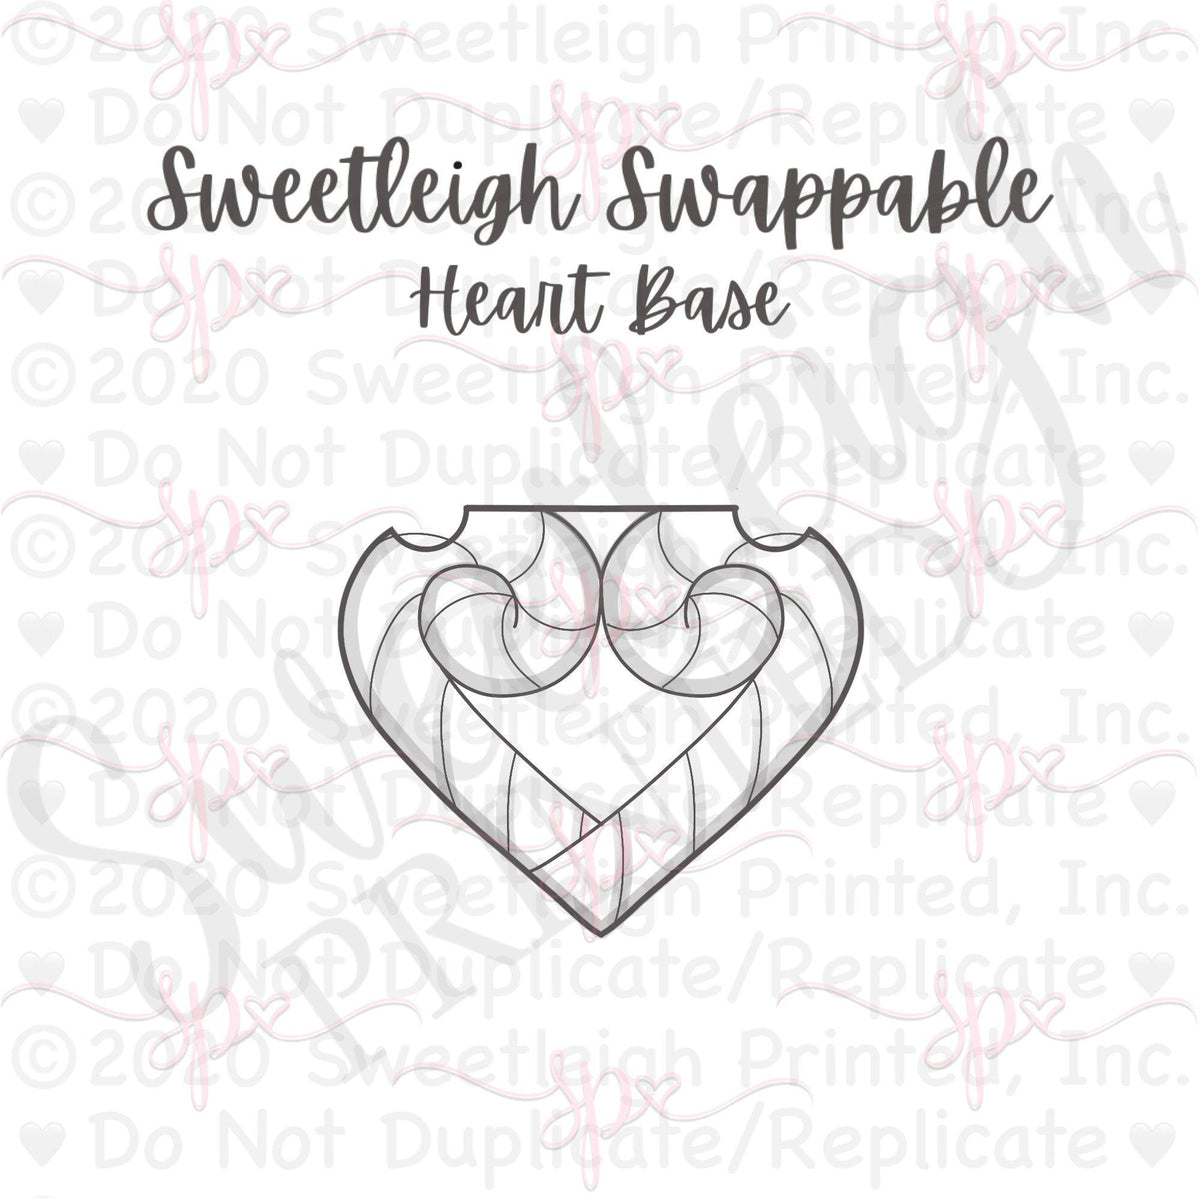 Sweetleigh Swappable Heart Base Cookie Cutter - Sweetleigh 